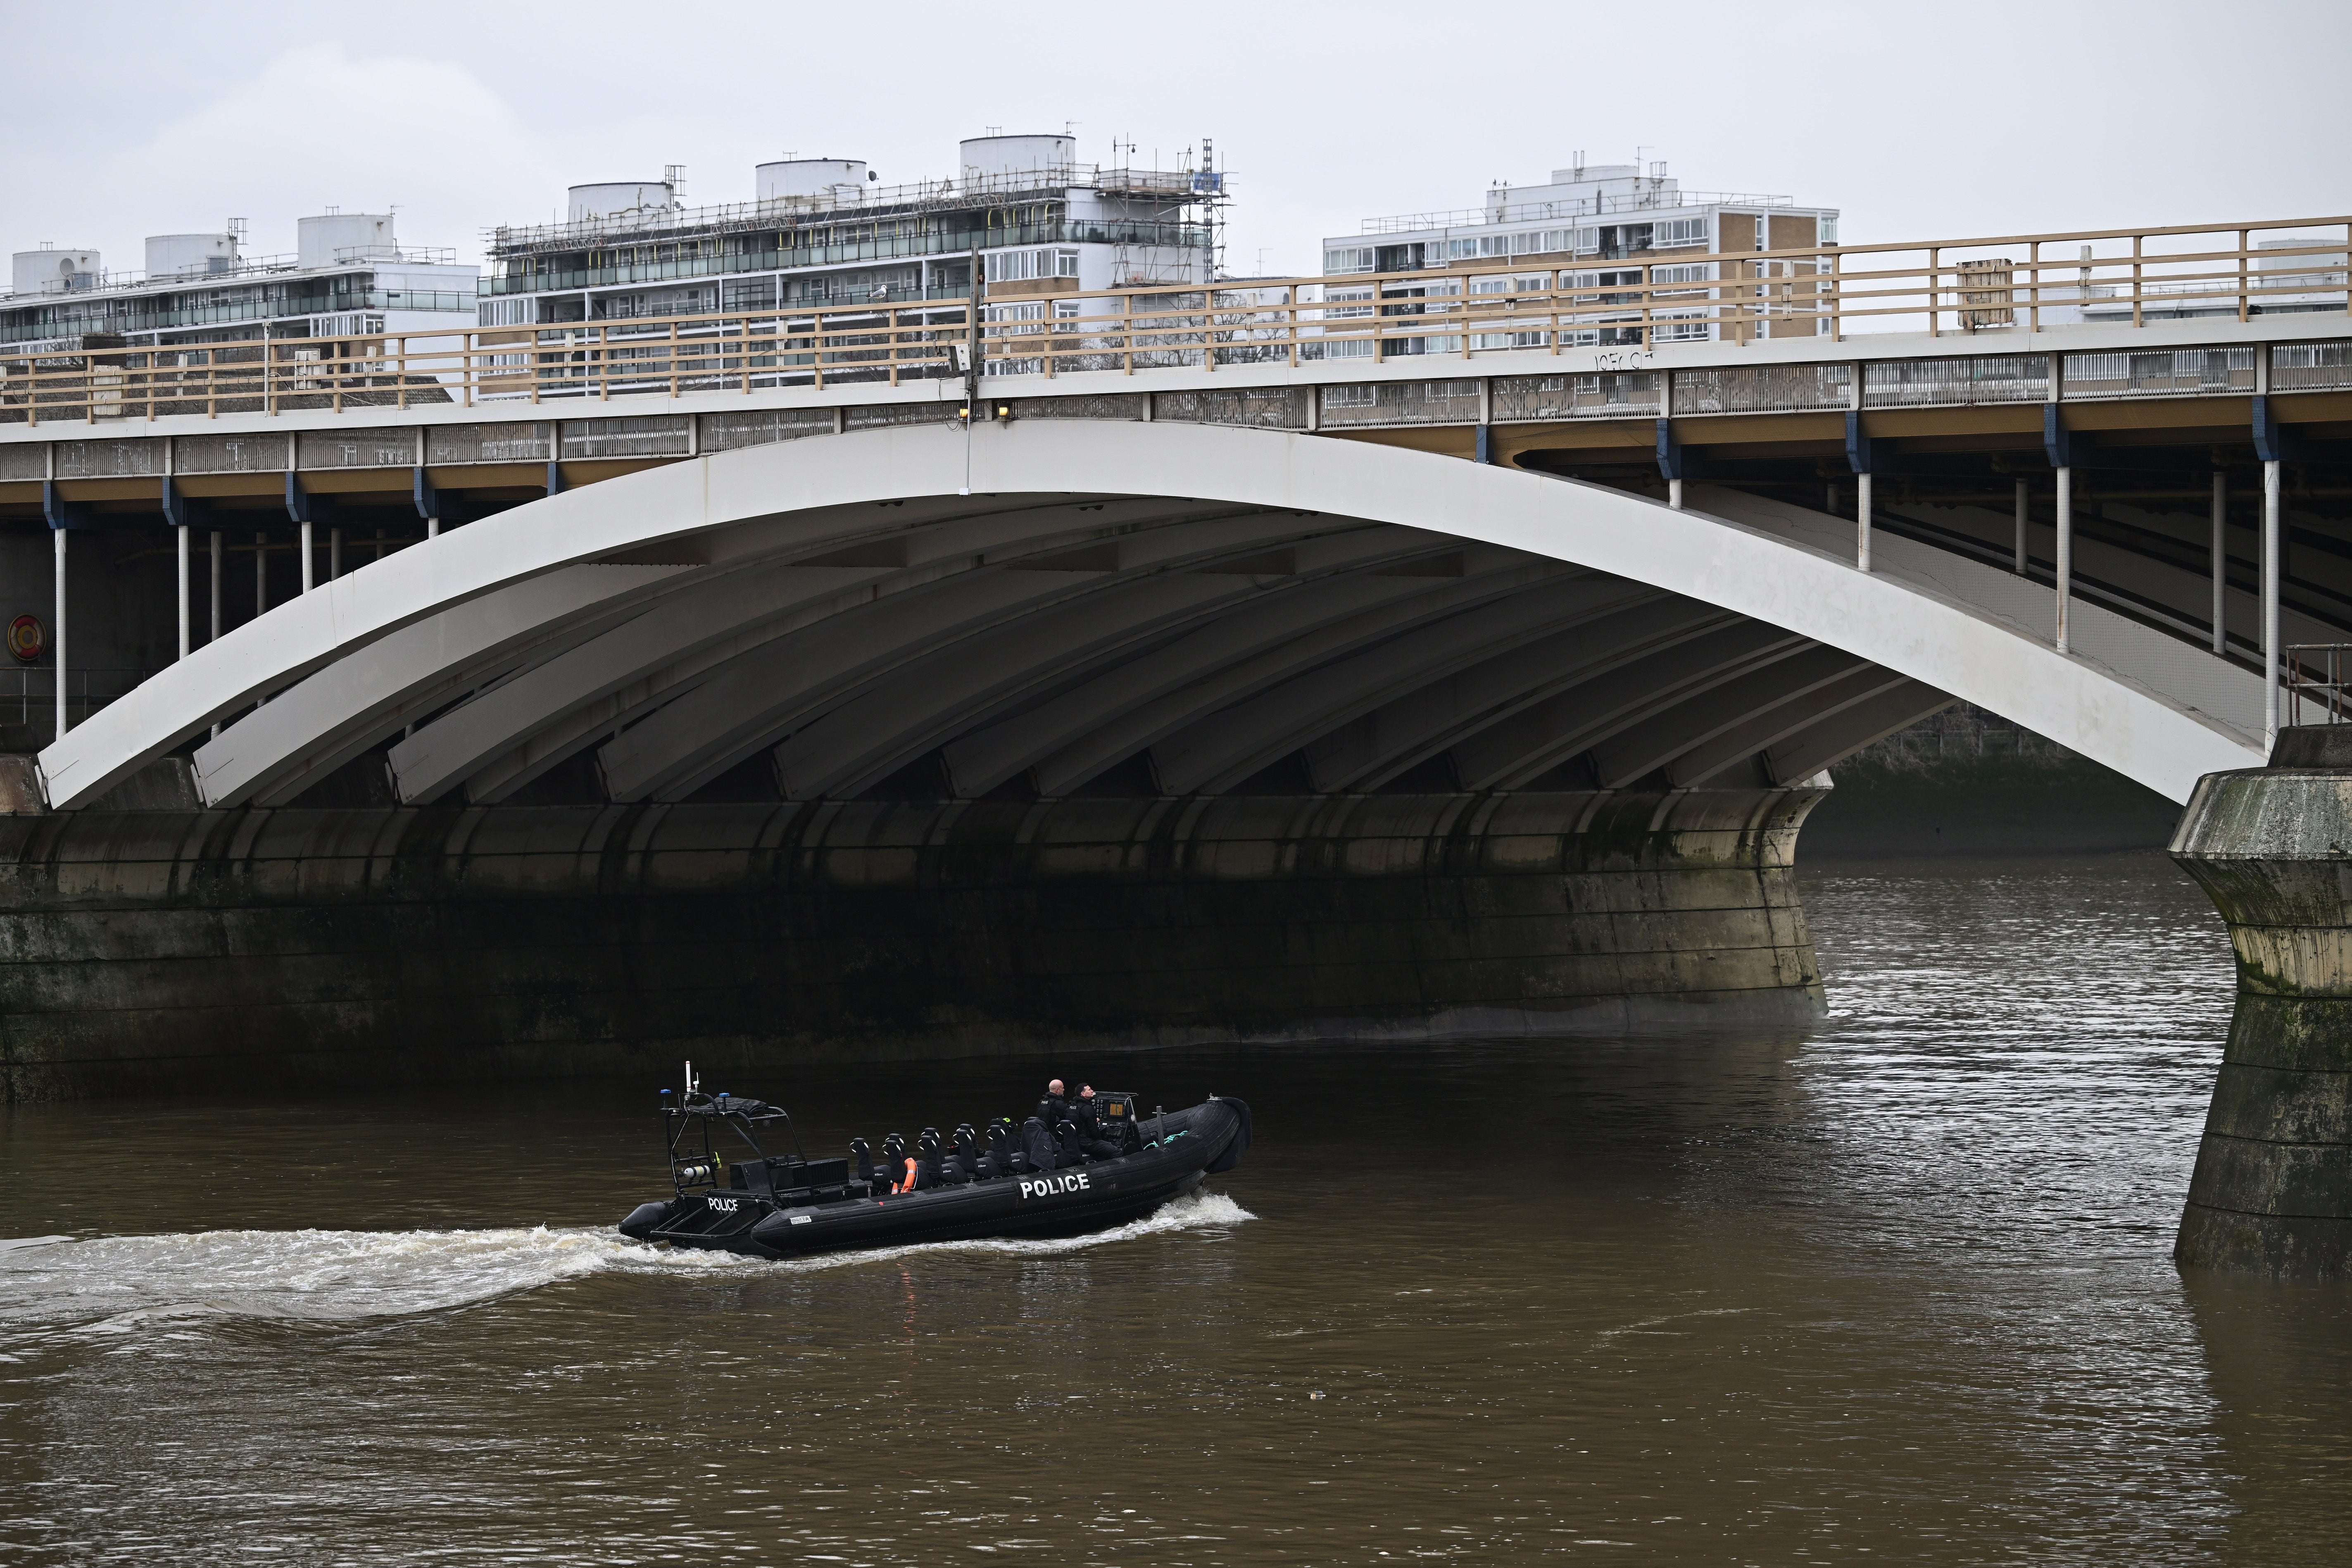 Police boats are spotted searching the Thames near Chelsea Bridge on Saturday February 10